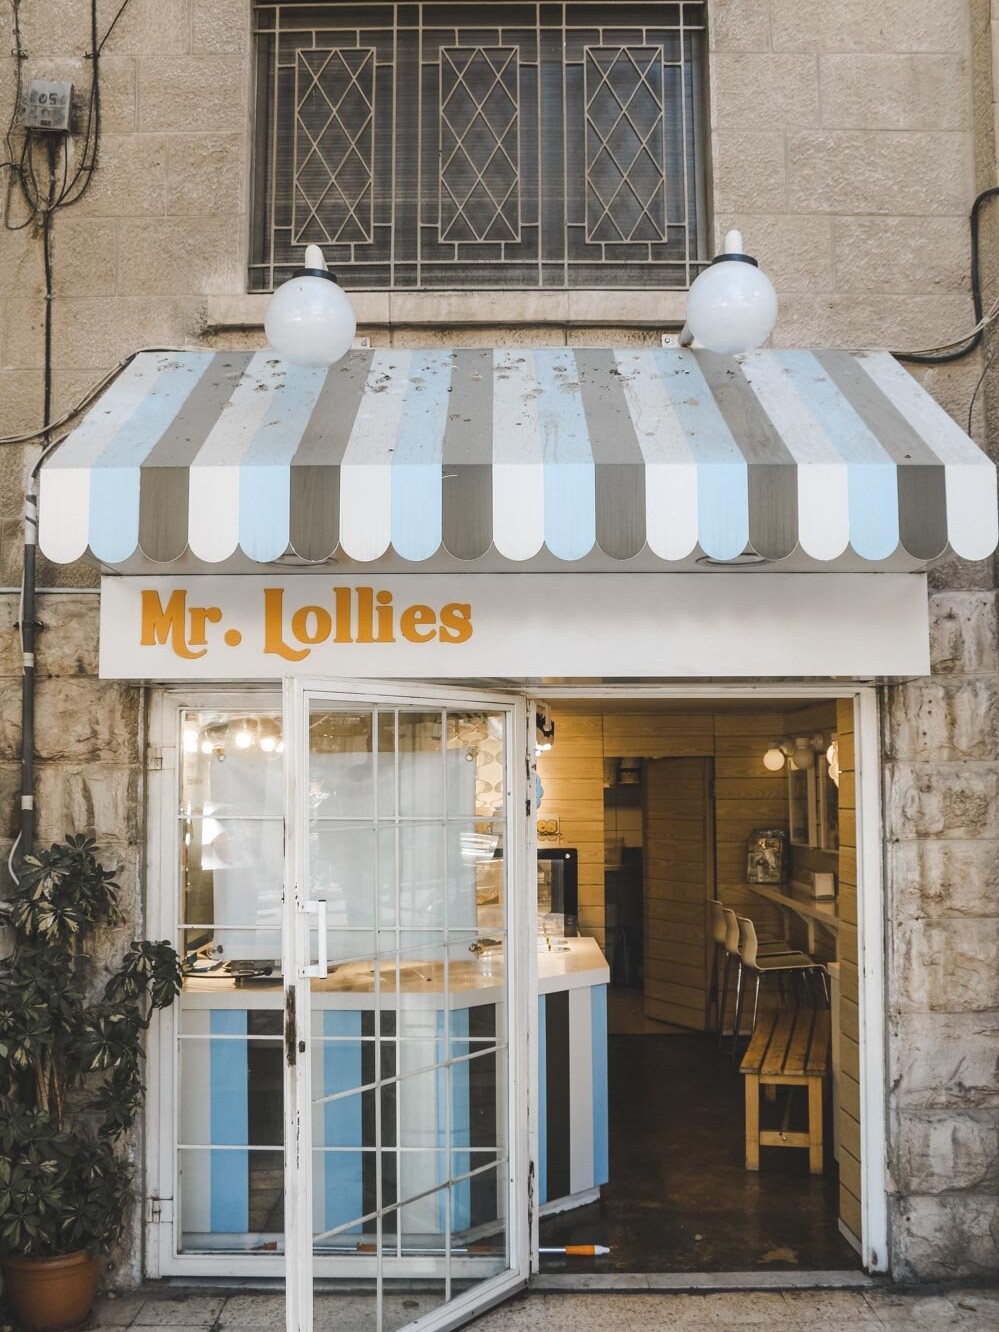 Ice cream shop in 1 day in amman - things to do in amman